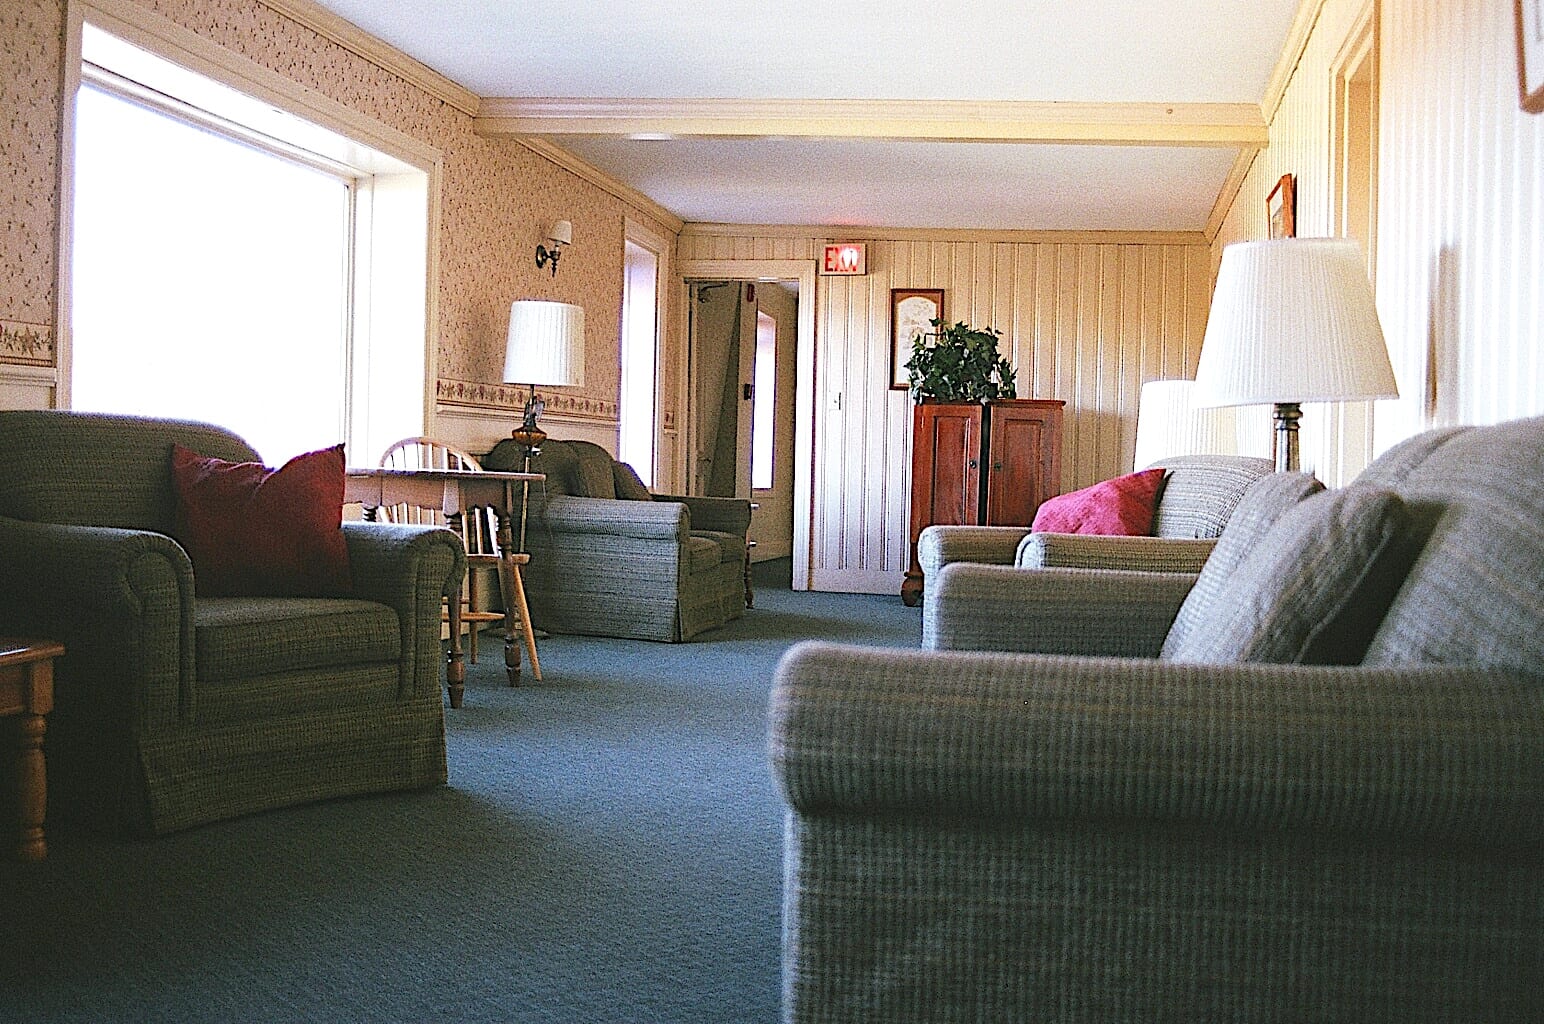 Living room on the top floor of the main lodge at Winter Clove Inn.